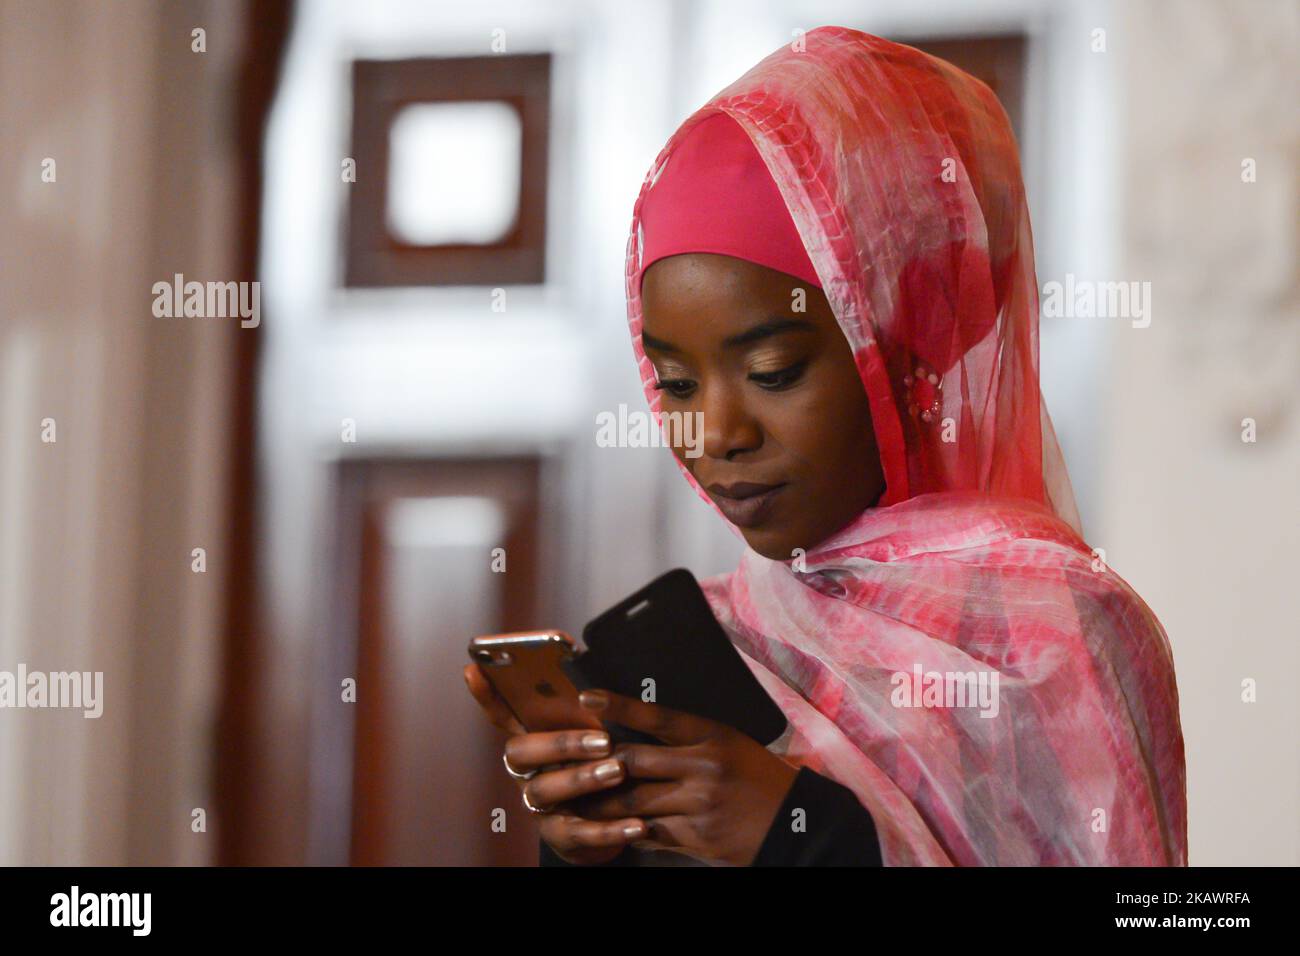 Belge actress, Martha Canga Antonio, during an on set photo call, which has just commenced in Dublin for the Pembridge Pictures and Umedia production of ‘A Girl from Mogadishu’ – a true story based on the testimony of Ifrah Ahmed. Born into a refugee camp in war-torn Somalia, Ifrah was trafficked to Ireland as a teenager. Recounting her traumatic childhood experiences of Female Genital Mutilation / Cutting (FGM/C) when applying for refugee status, she was again traumatized and decided to devote her life to the eradication of the practice. Ifrah emerged as one of the world’s foremost internati Stock Photo